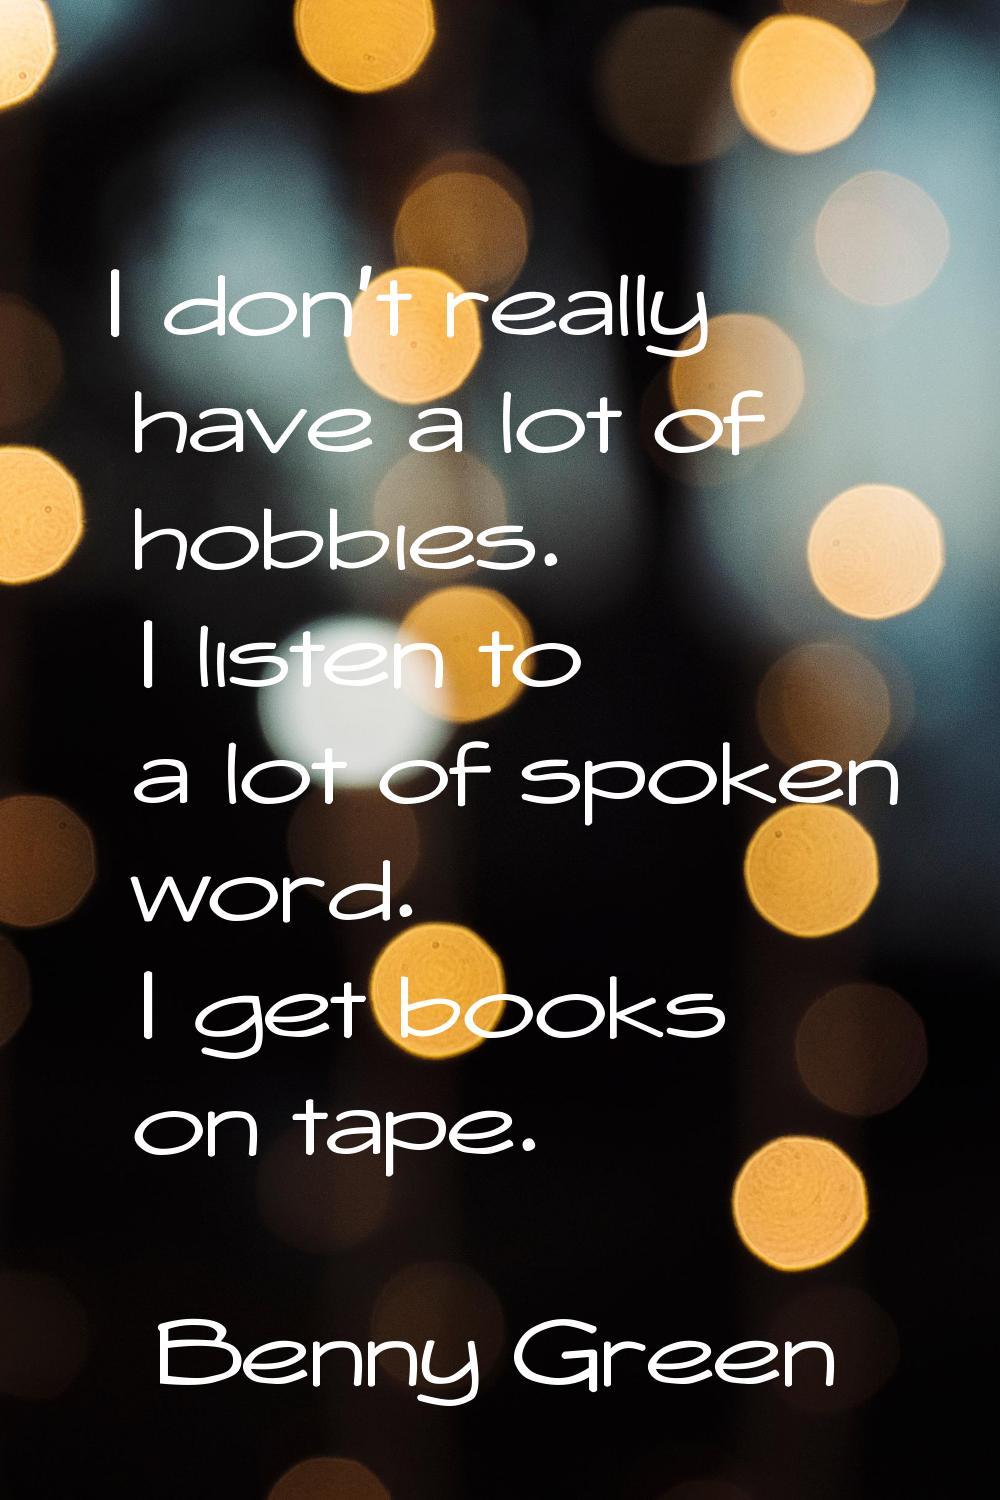 I don't really have a lot of hobbies. I listen to a lot of spoken word. I get books on tape.